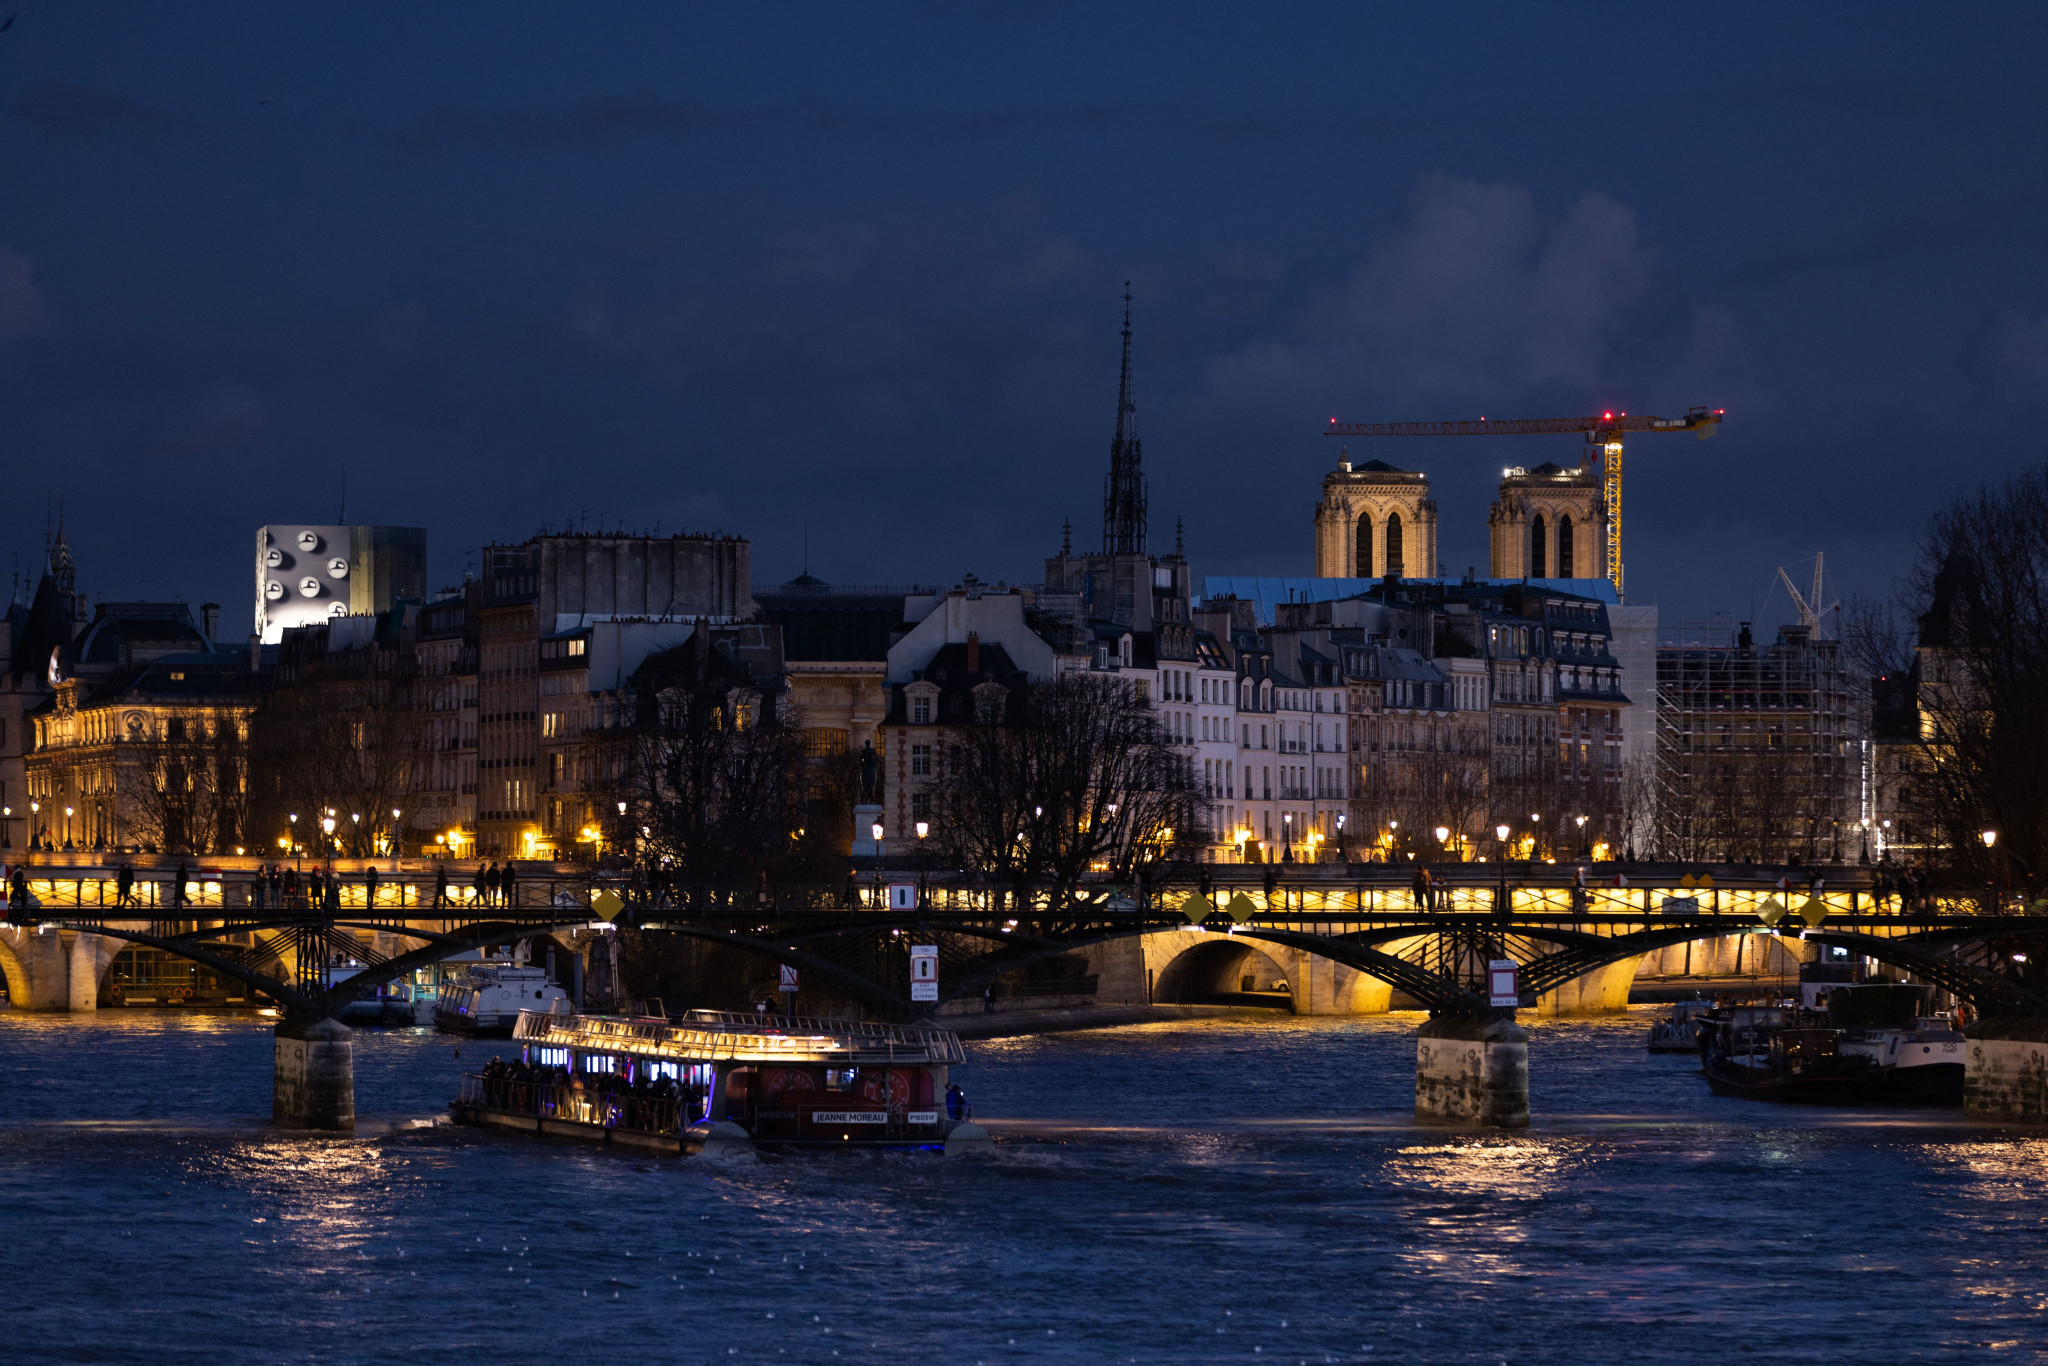 The posters will be displayed along the River Seine ©Getty Images